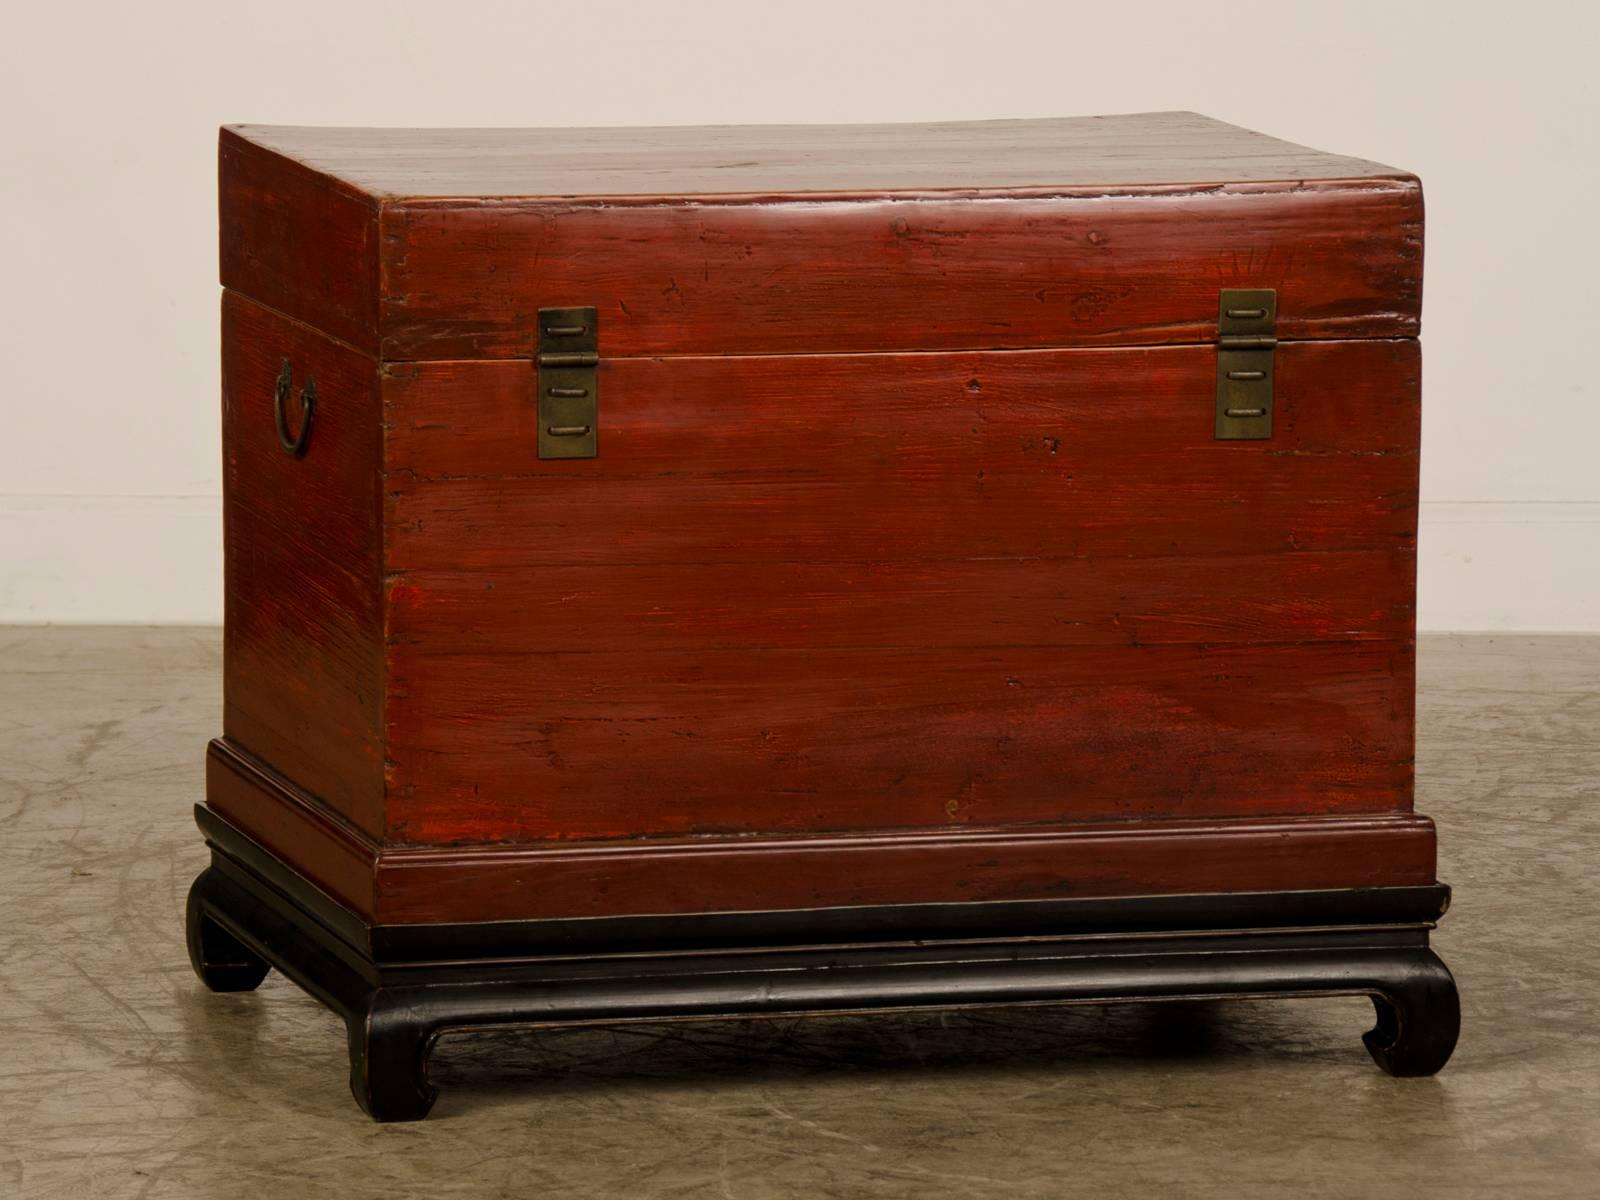 Red Lacquer Antique Chinese Trunk Kuang Hsu Period China, circa 1875 1